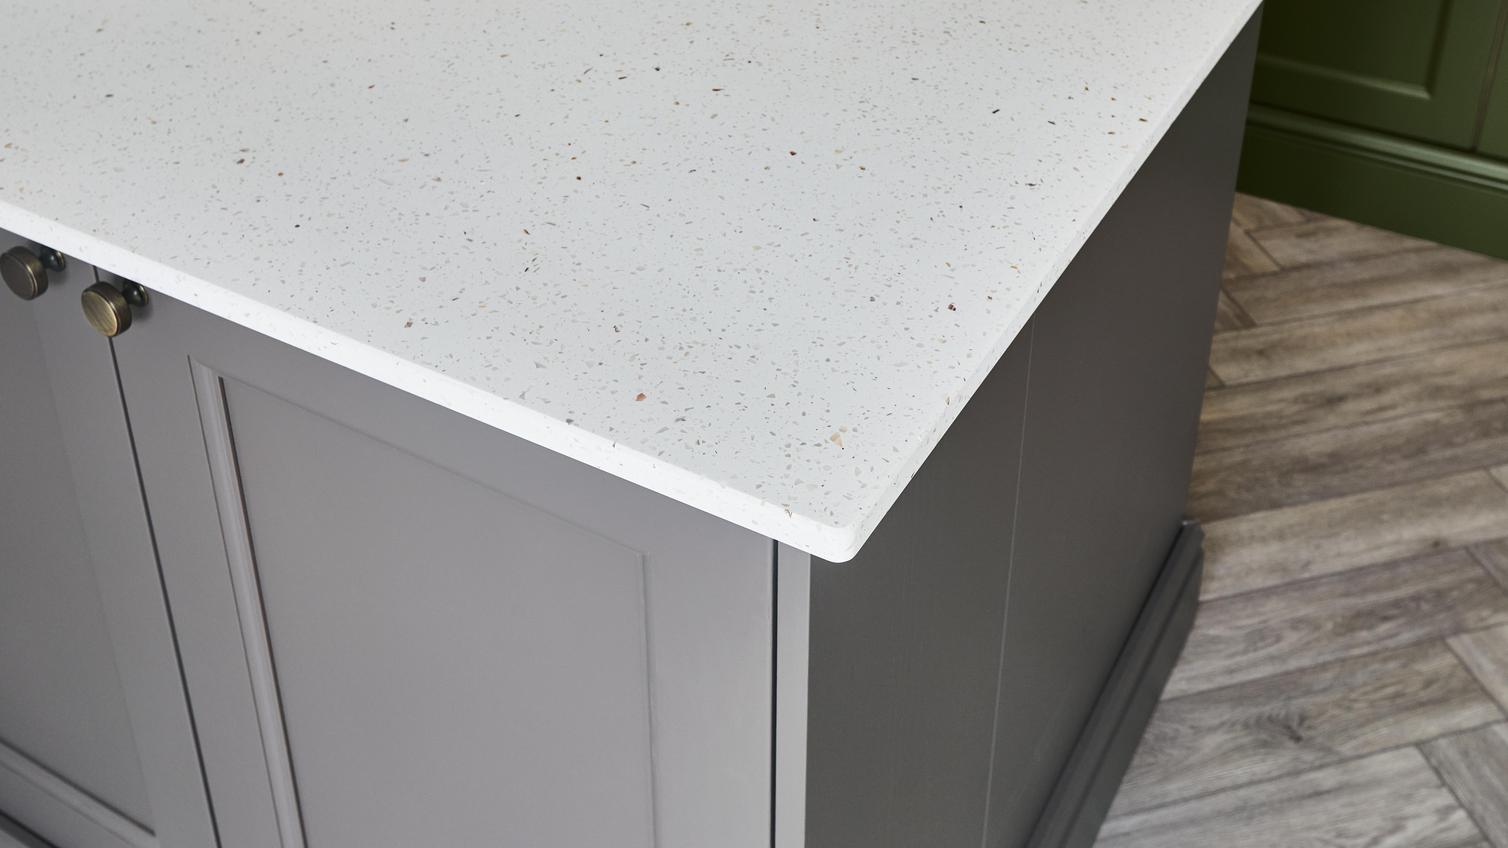 A white bespoke acrylic worktop on a brown-tone kitchen island. The door fronts have a shaker design and brass handles.